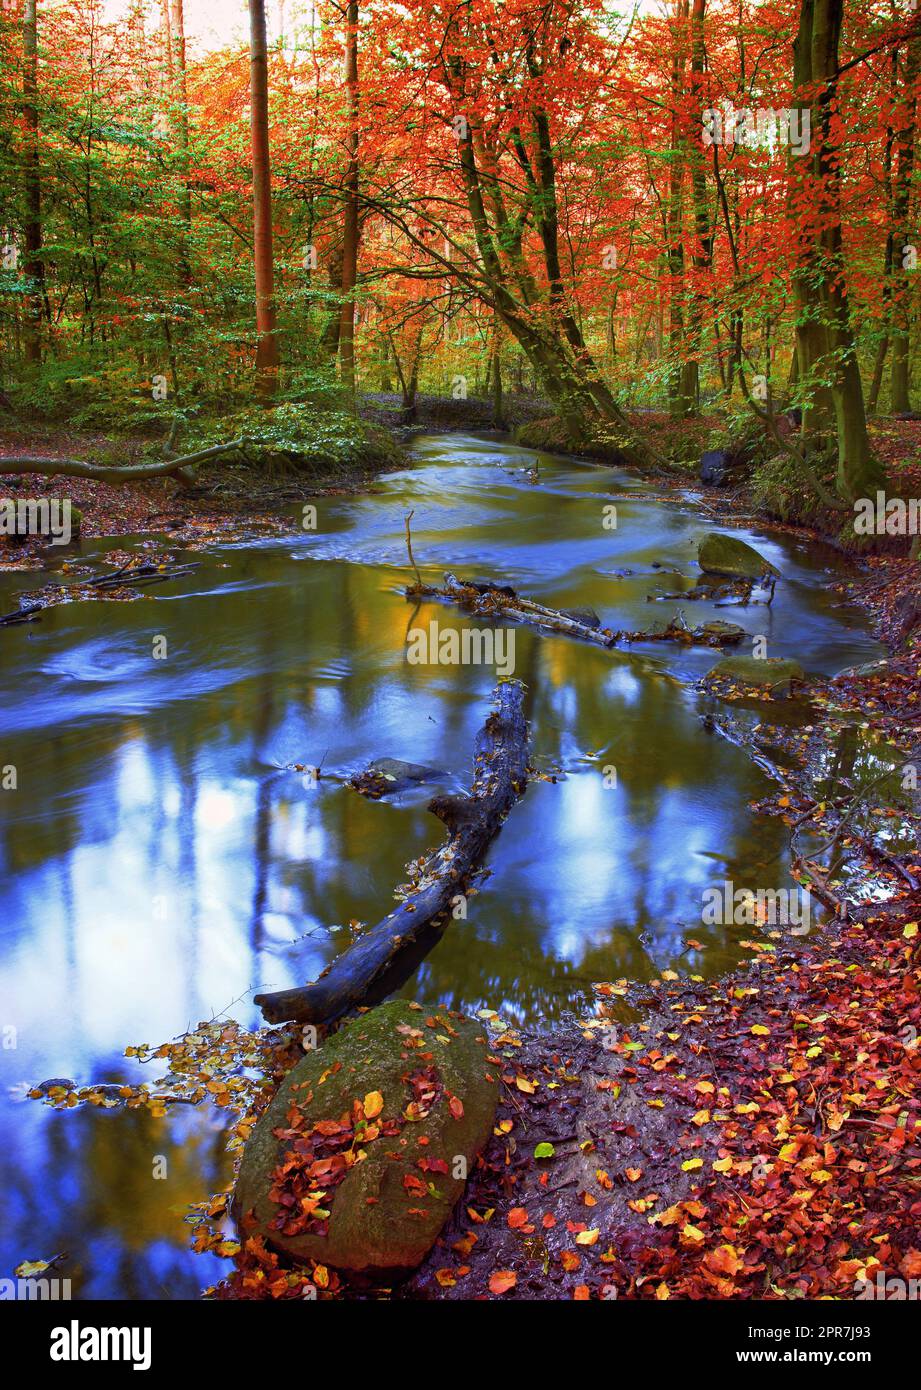 Beautiful and vibrant autumn forest and a stream flowing through it. The landscape of a river in the woods outdoors in nature near tall trees with yellow and orange leaves Stock Photo